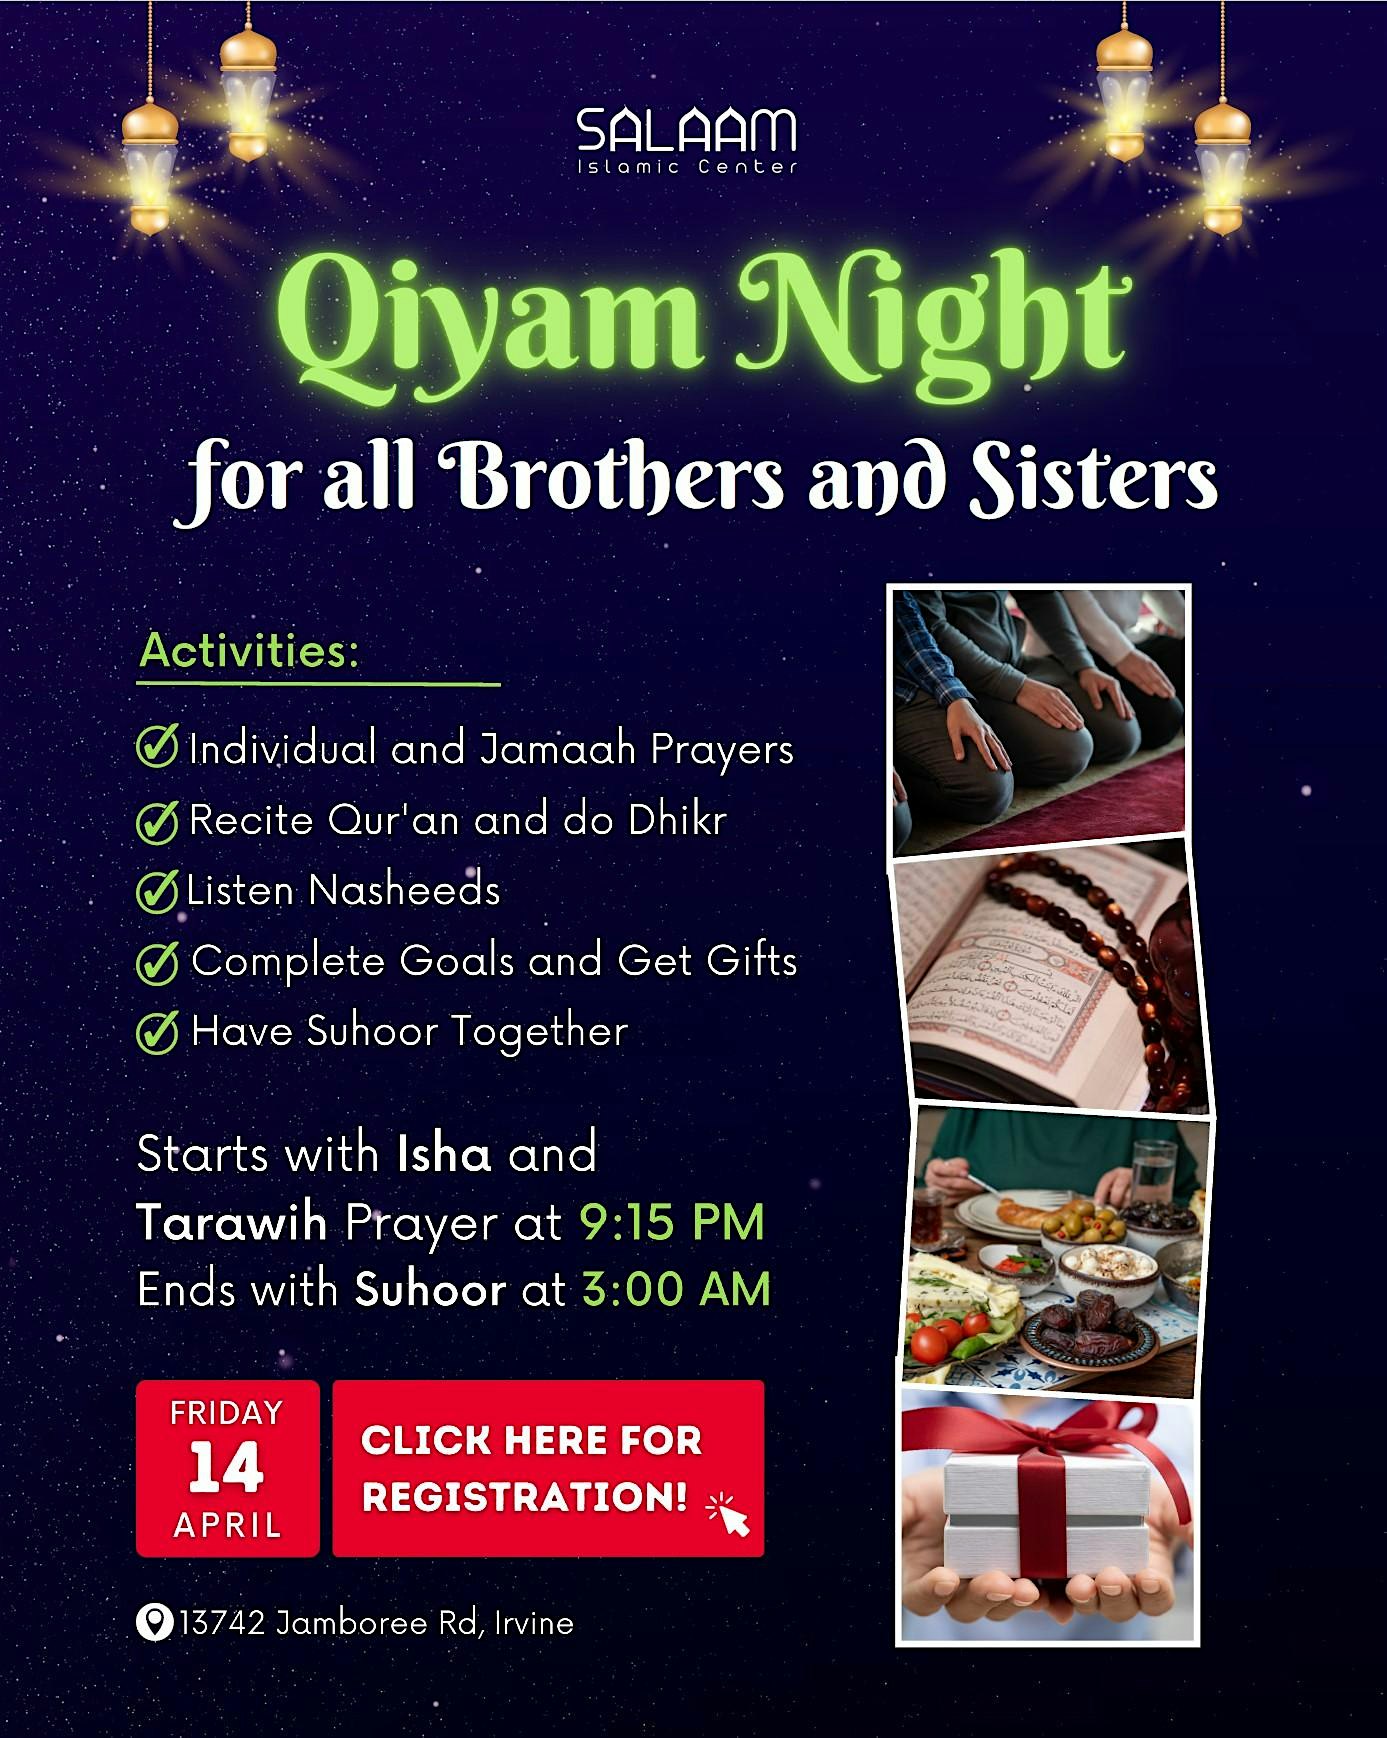 Qiyam Night for all Brothers and Sisters